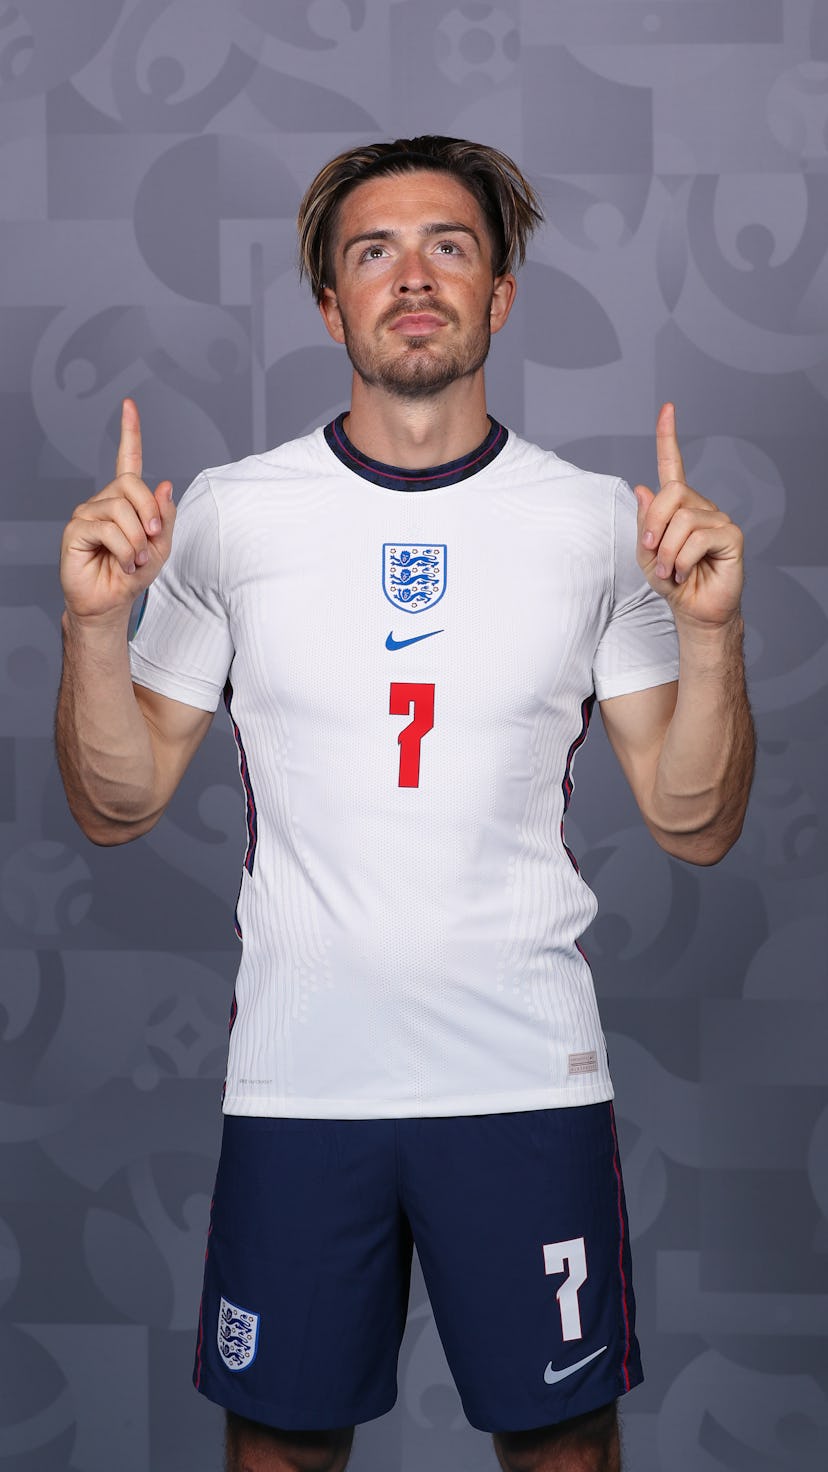  Jack Grealish of England poses during the official UEFA Euro 2020 press day